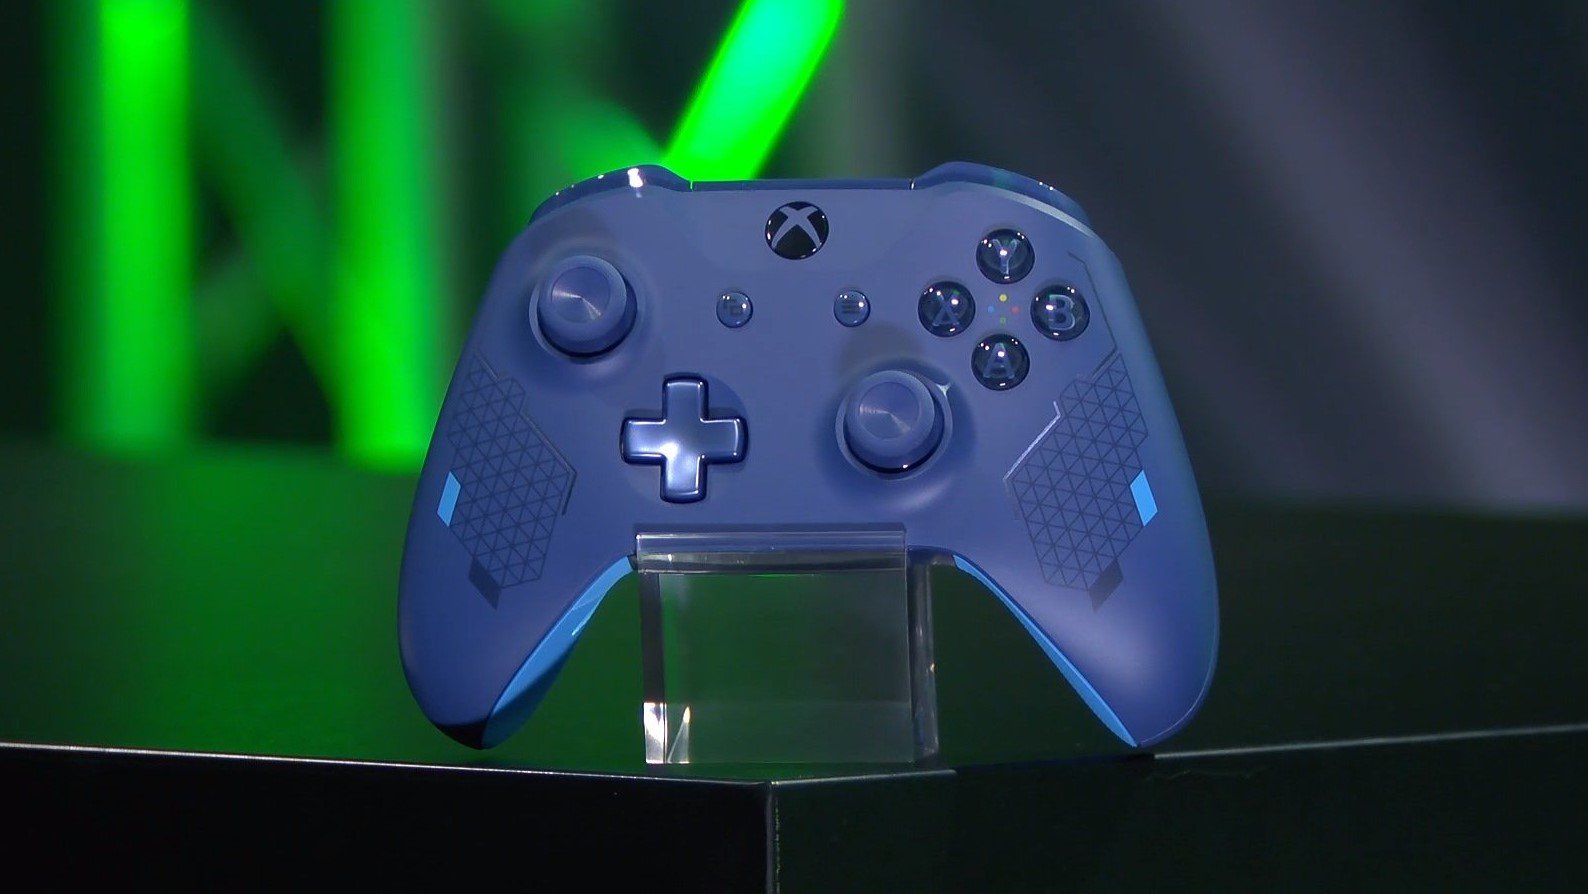 Xbox Wireless Controller – Sport Blue Special Edition